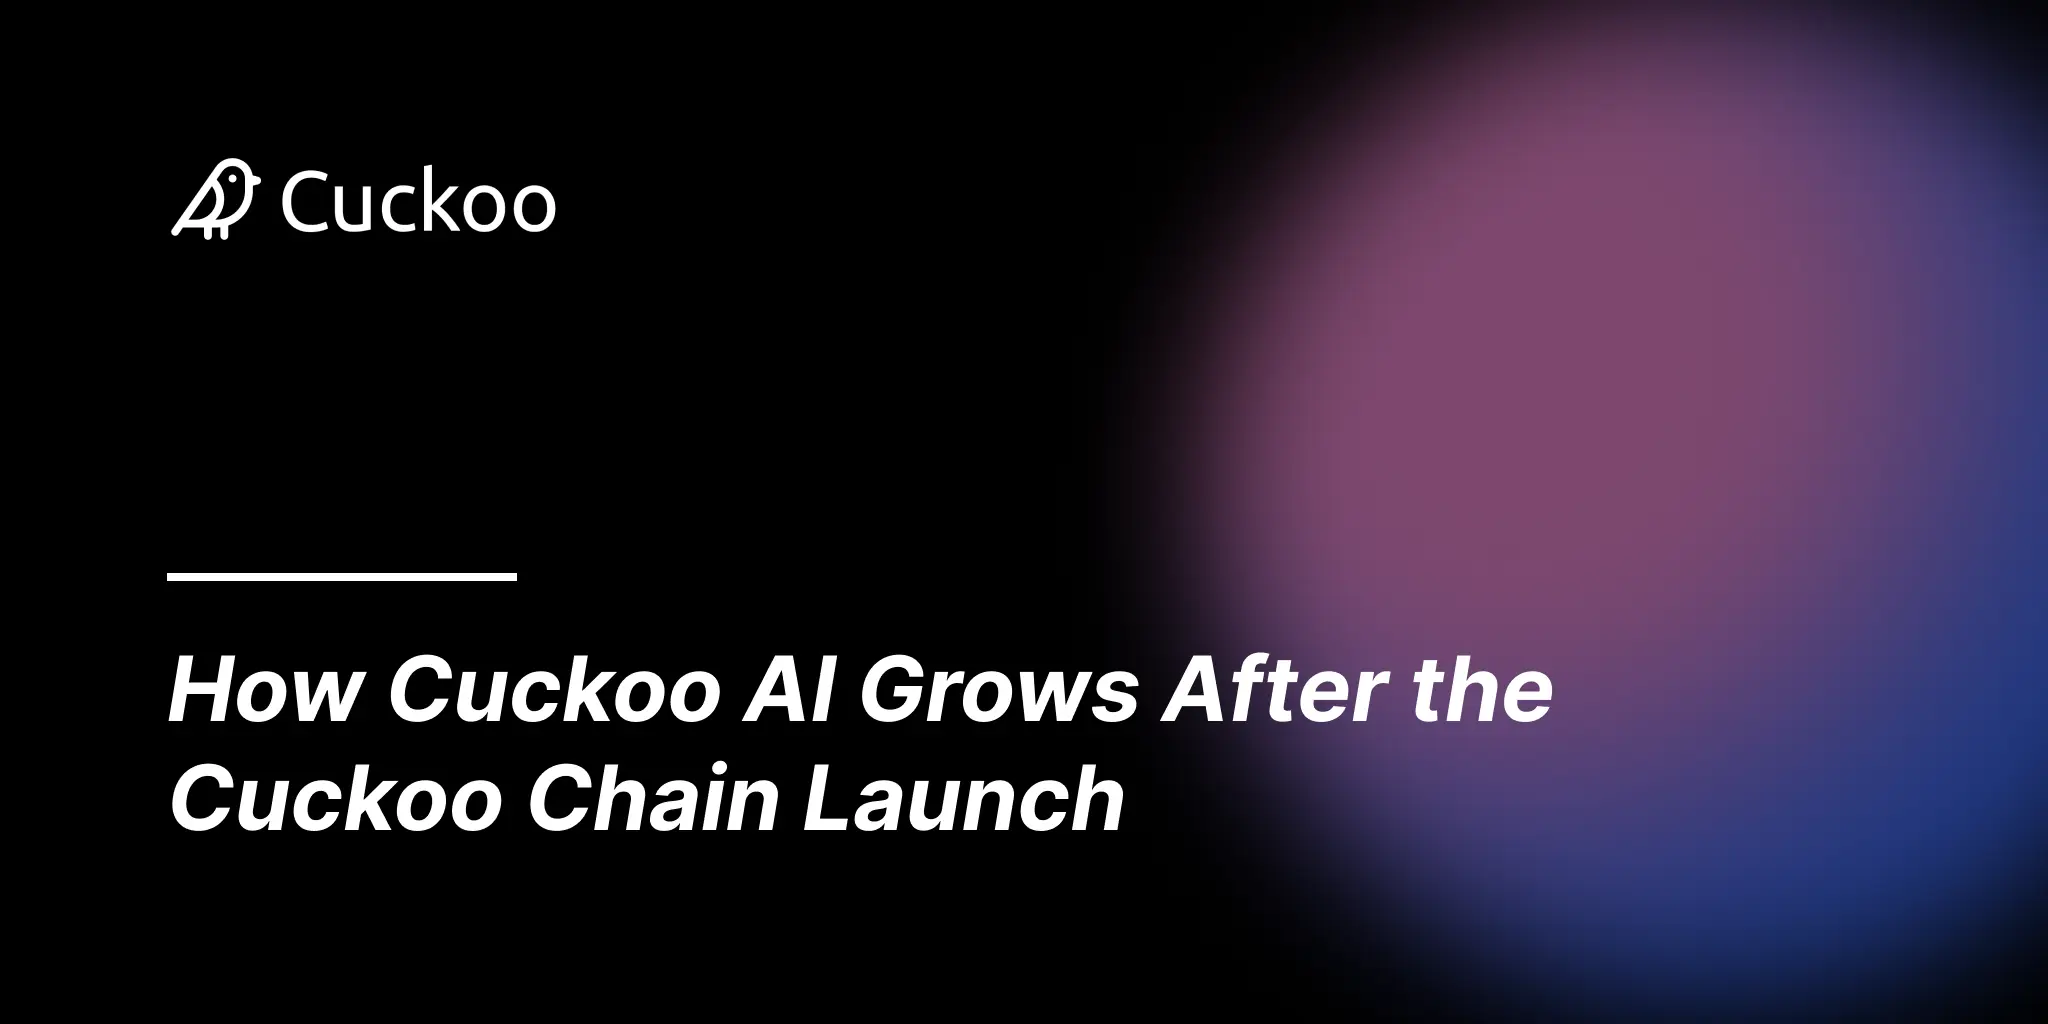 How Cuckoo AI Grows After the Cuckoo Chain Launch